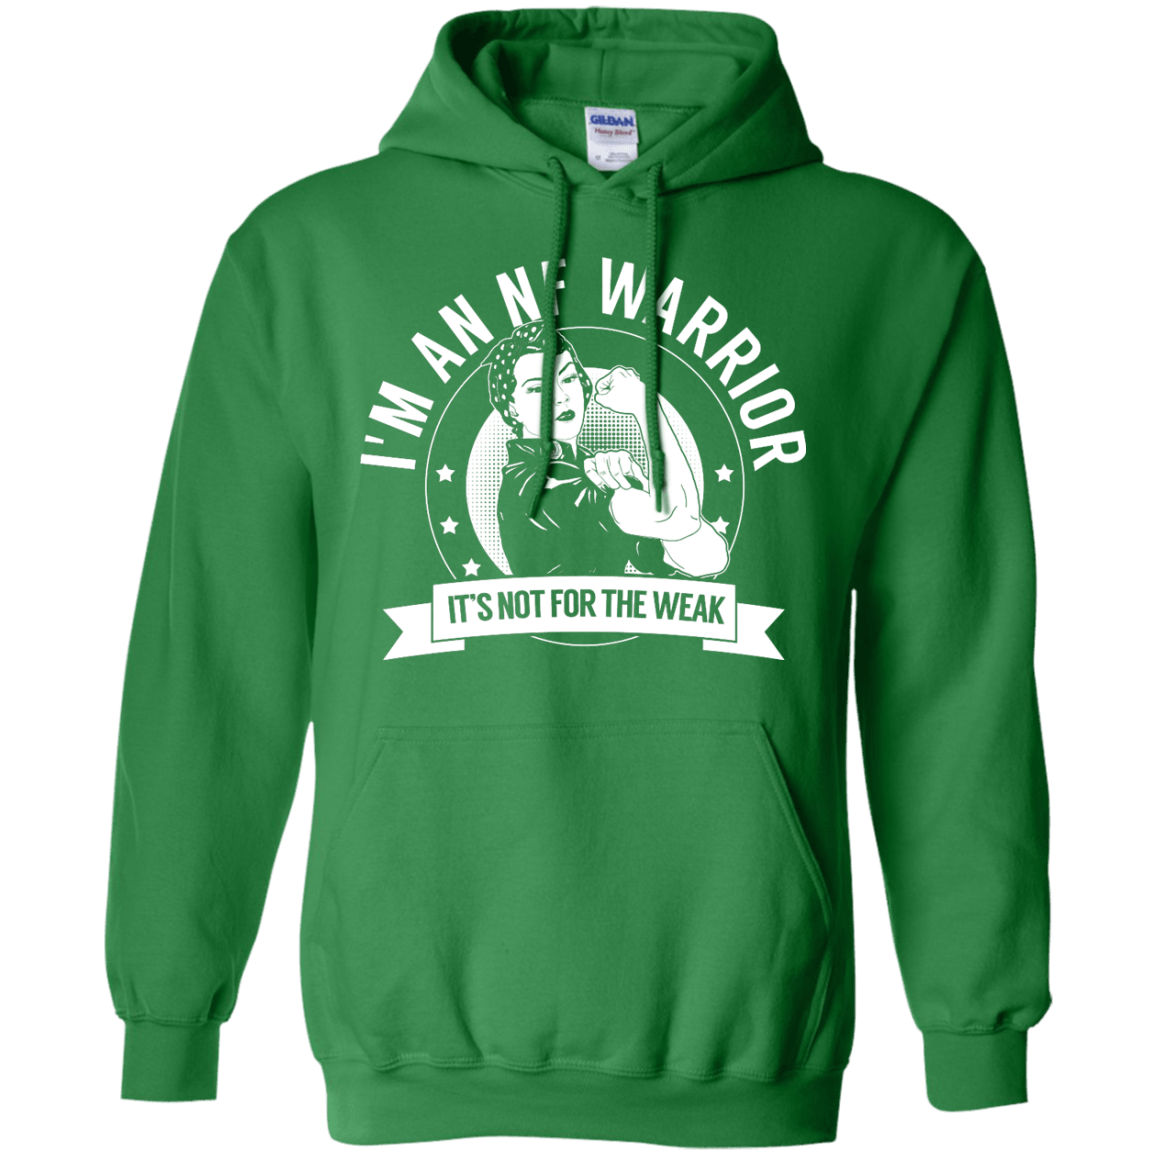 Neurofibromatosis - NF Warrior Not For The Weak Pullover Hoodie 8 oz - The Unchargeables